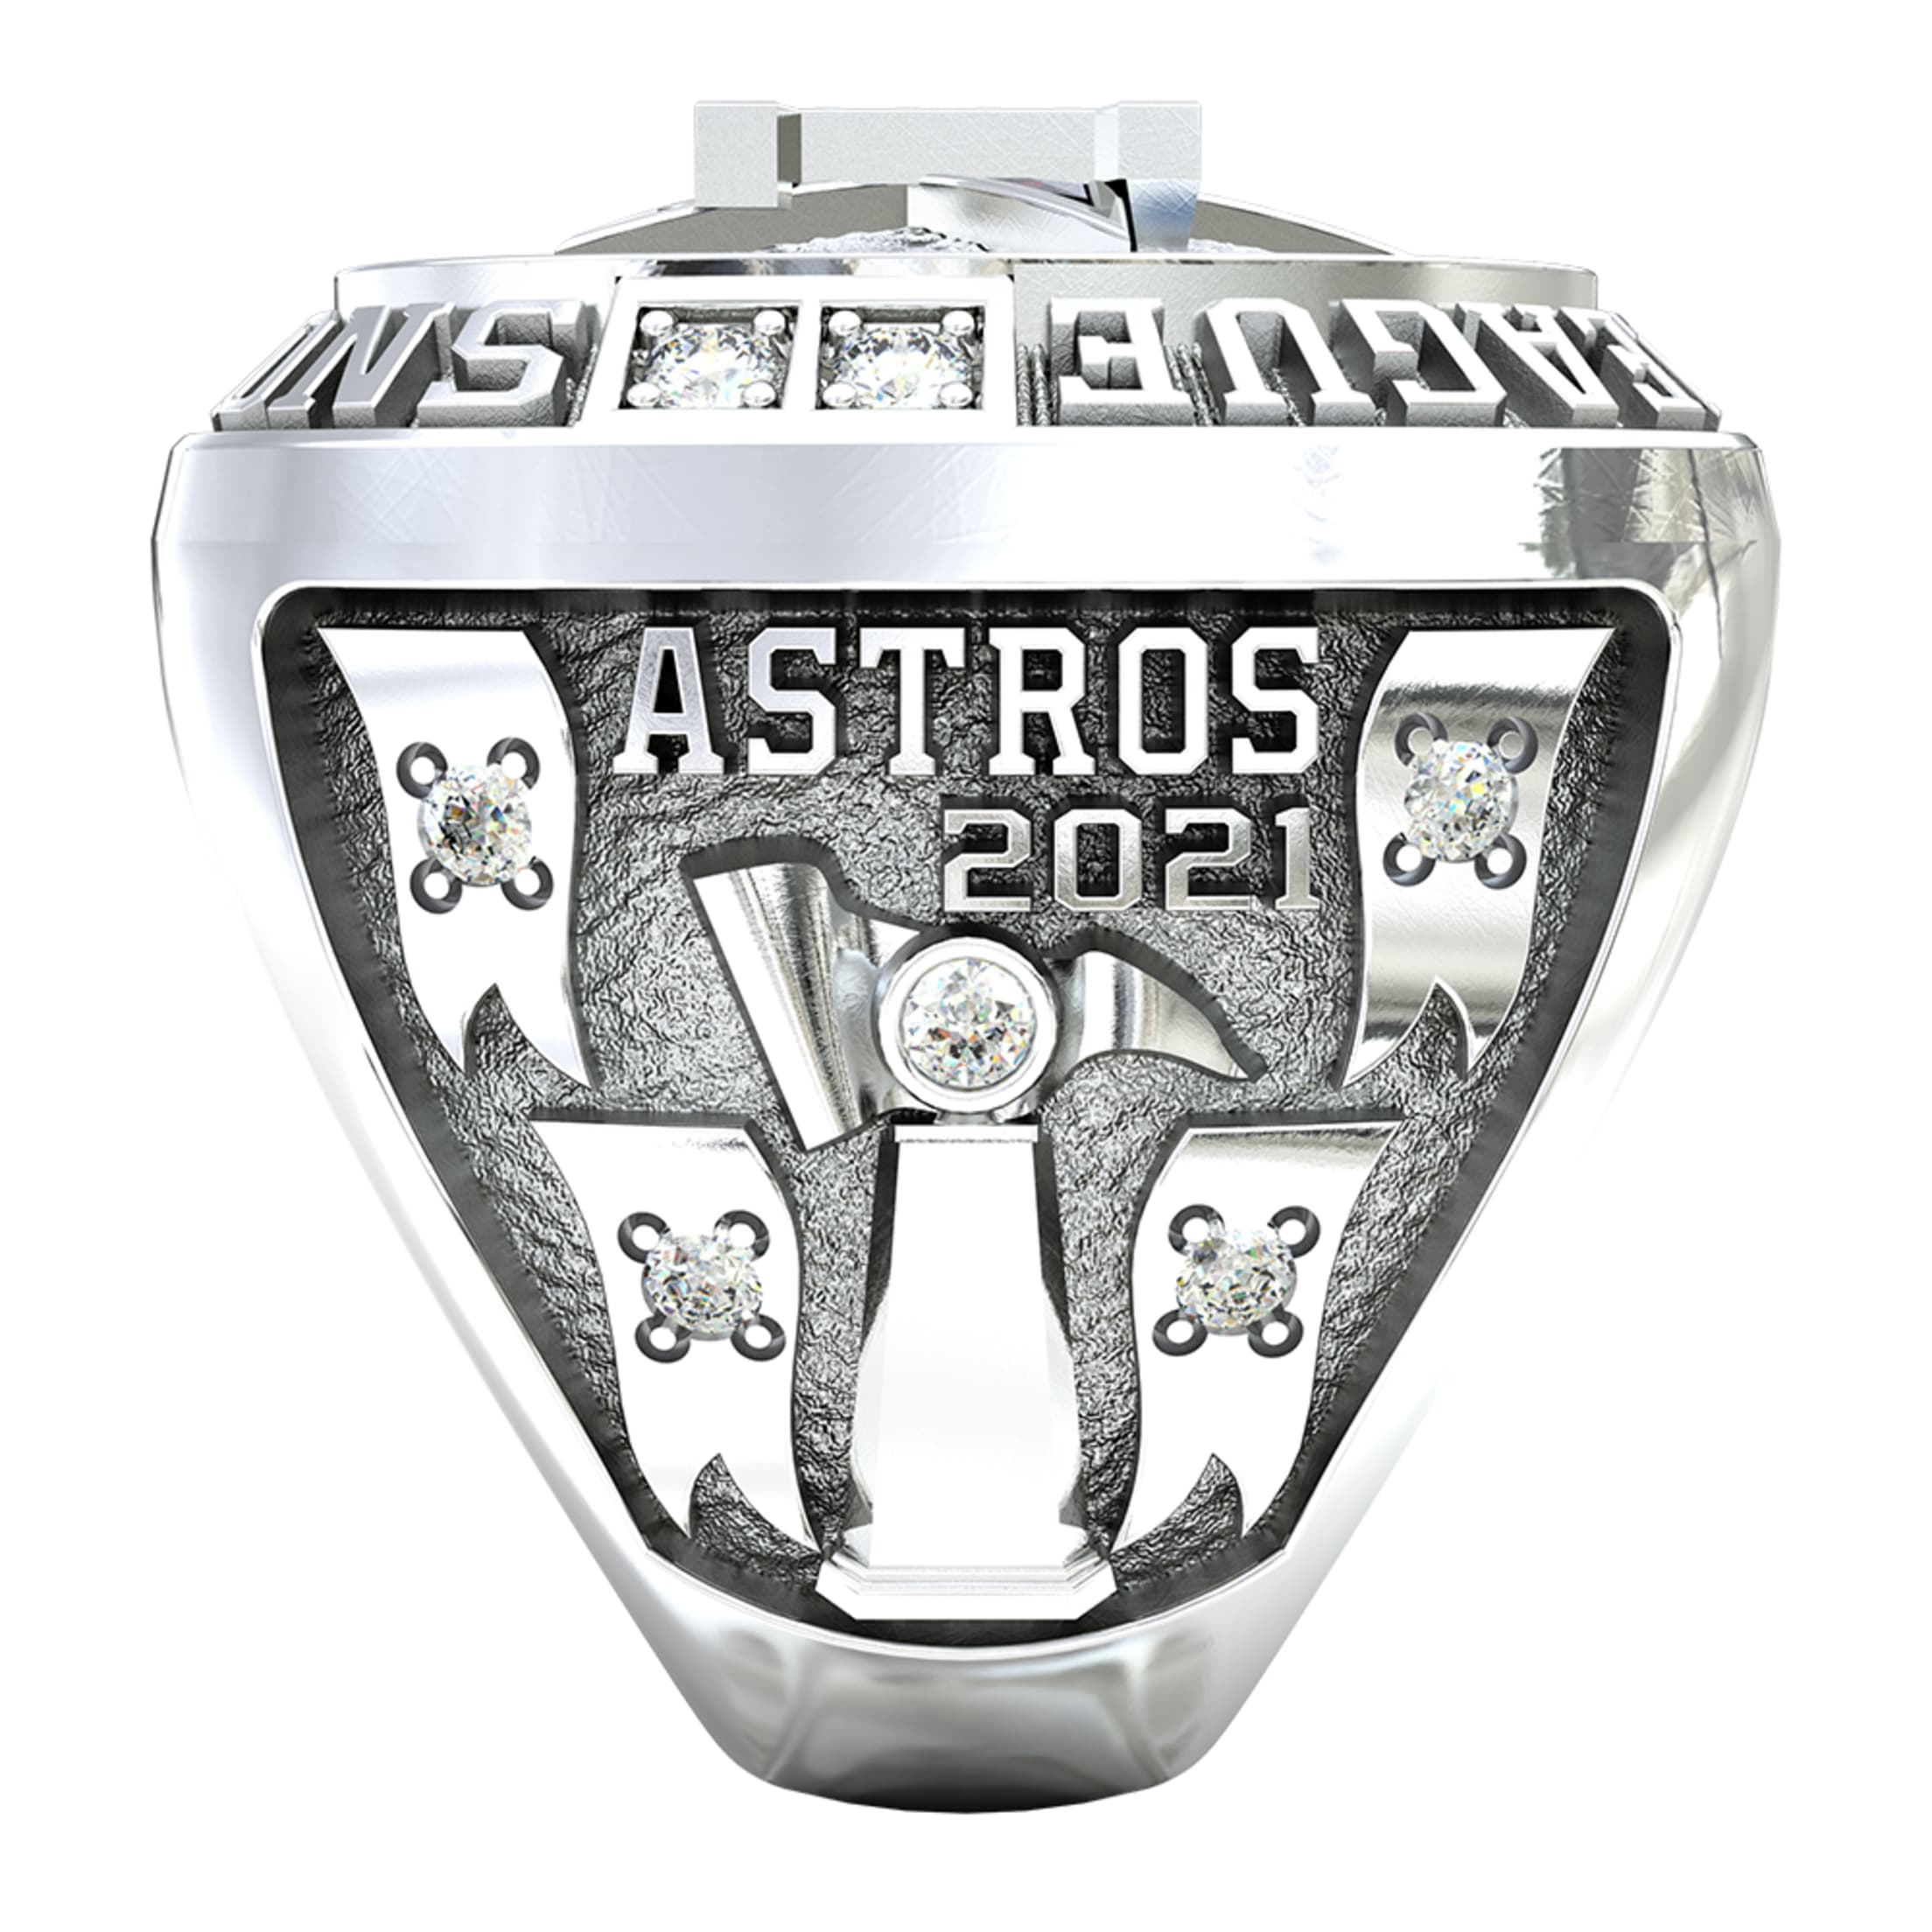 Check out this years All Star Rings